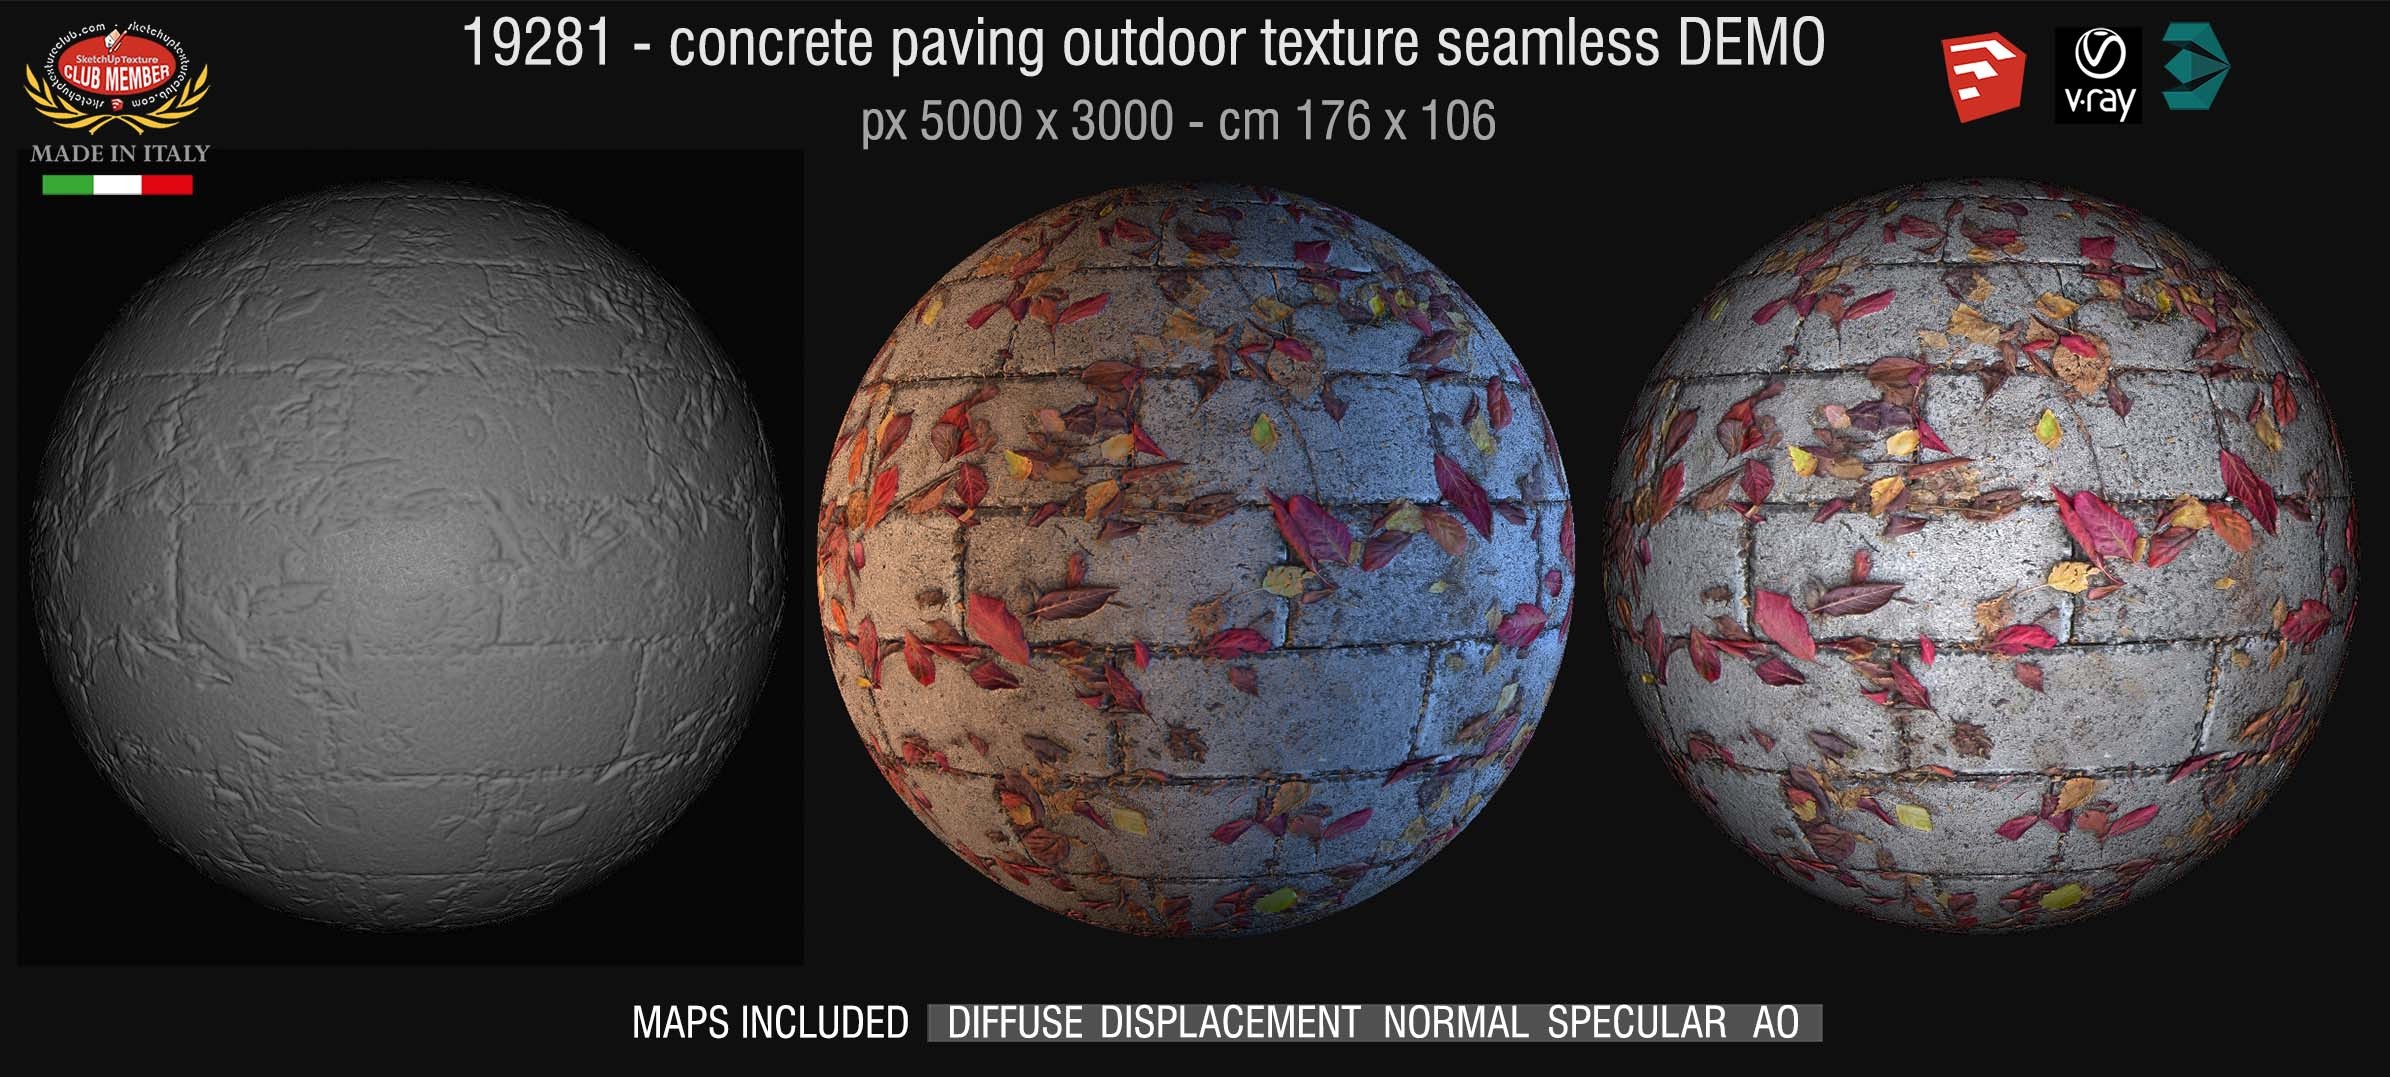 19281 HR Concrete paving outdoor with dead leaves texture + maps DEMO